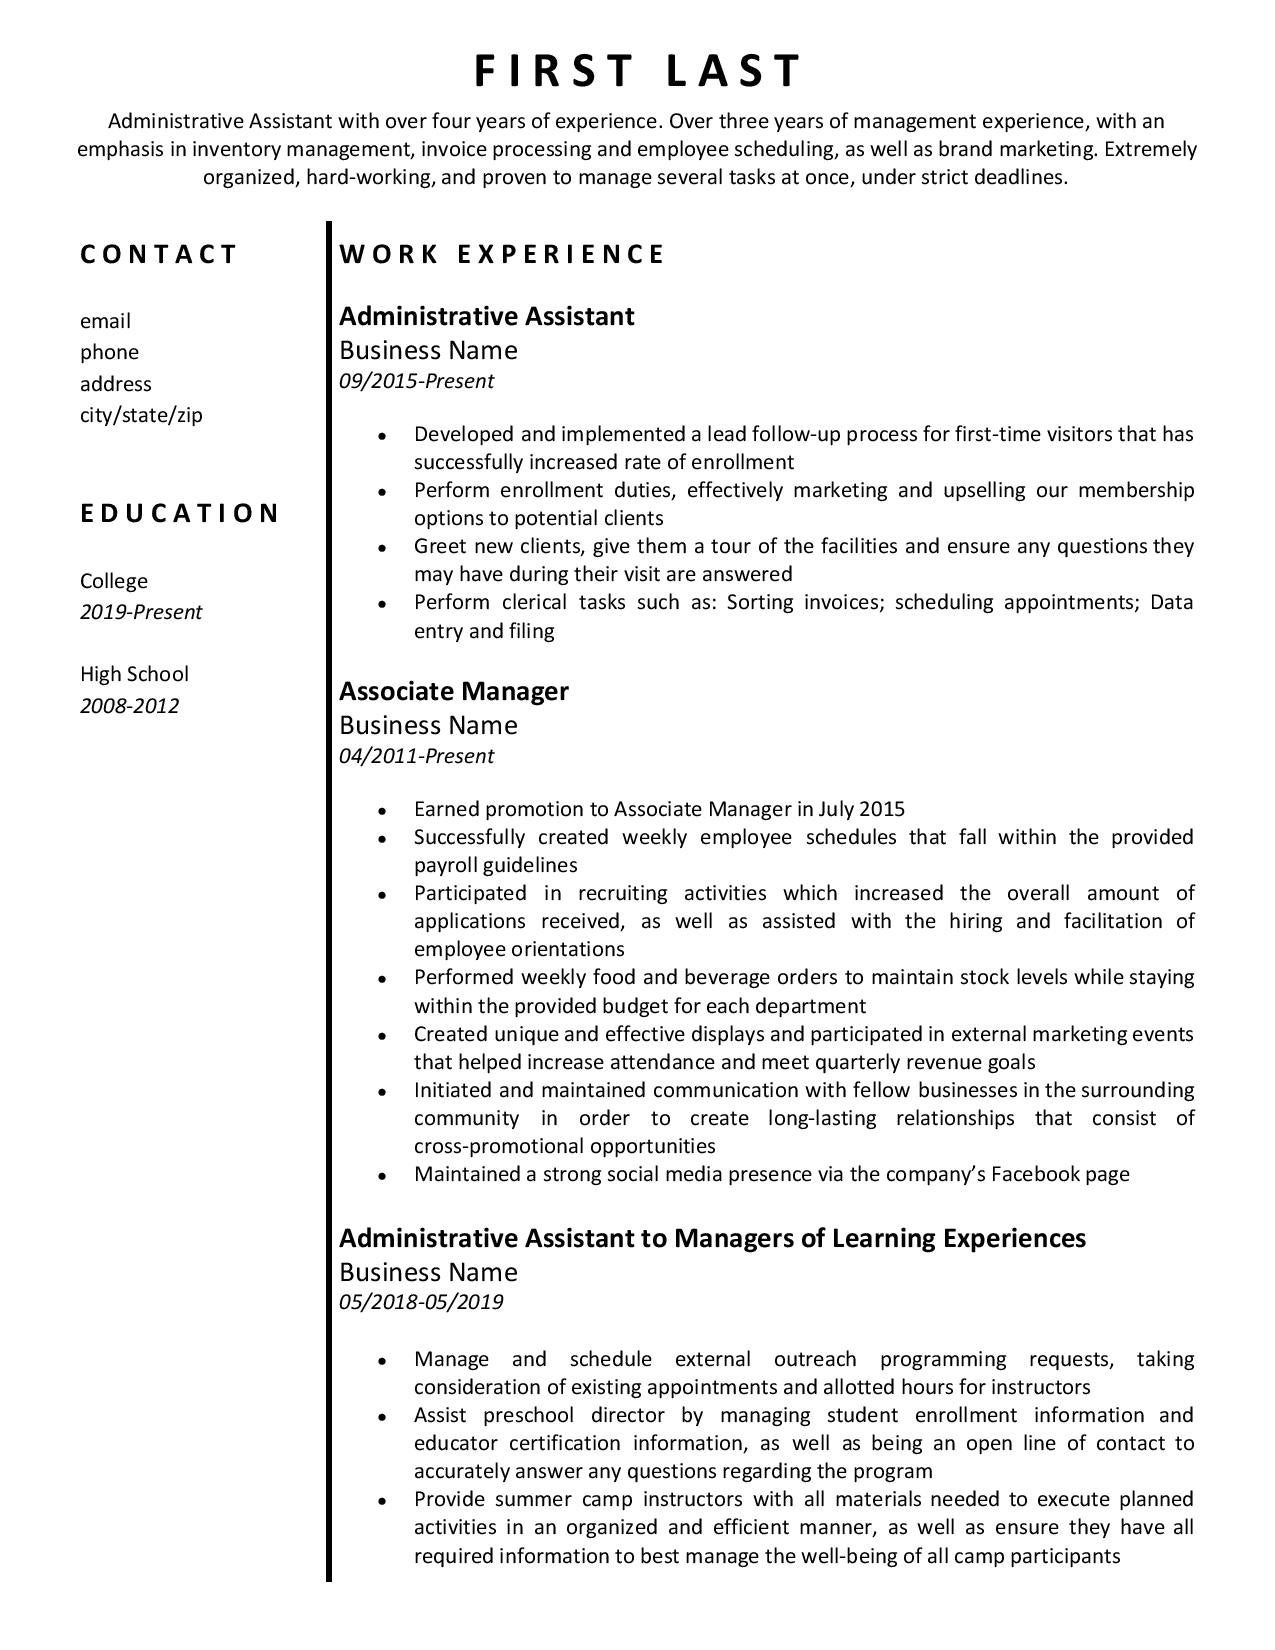 Resume Sample Multiple Jobs Same Company Help! – Multiple Positions within Same Company and On/off …